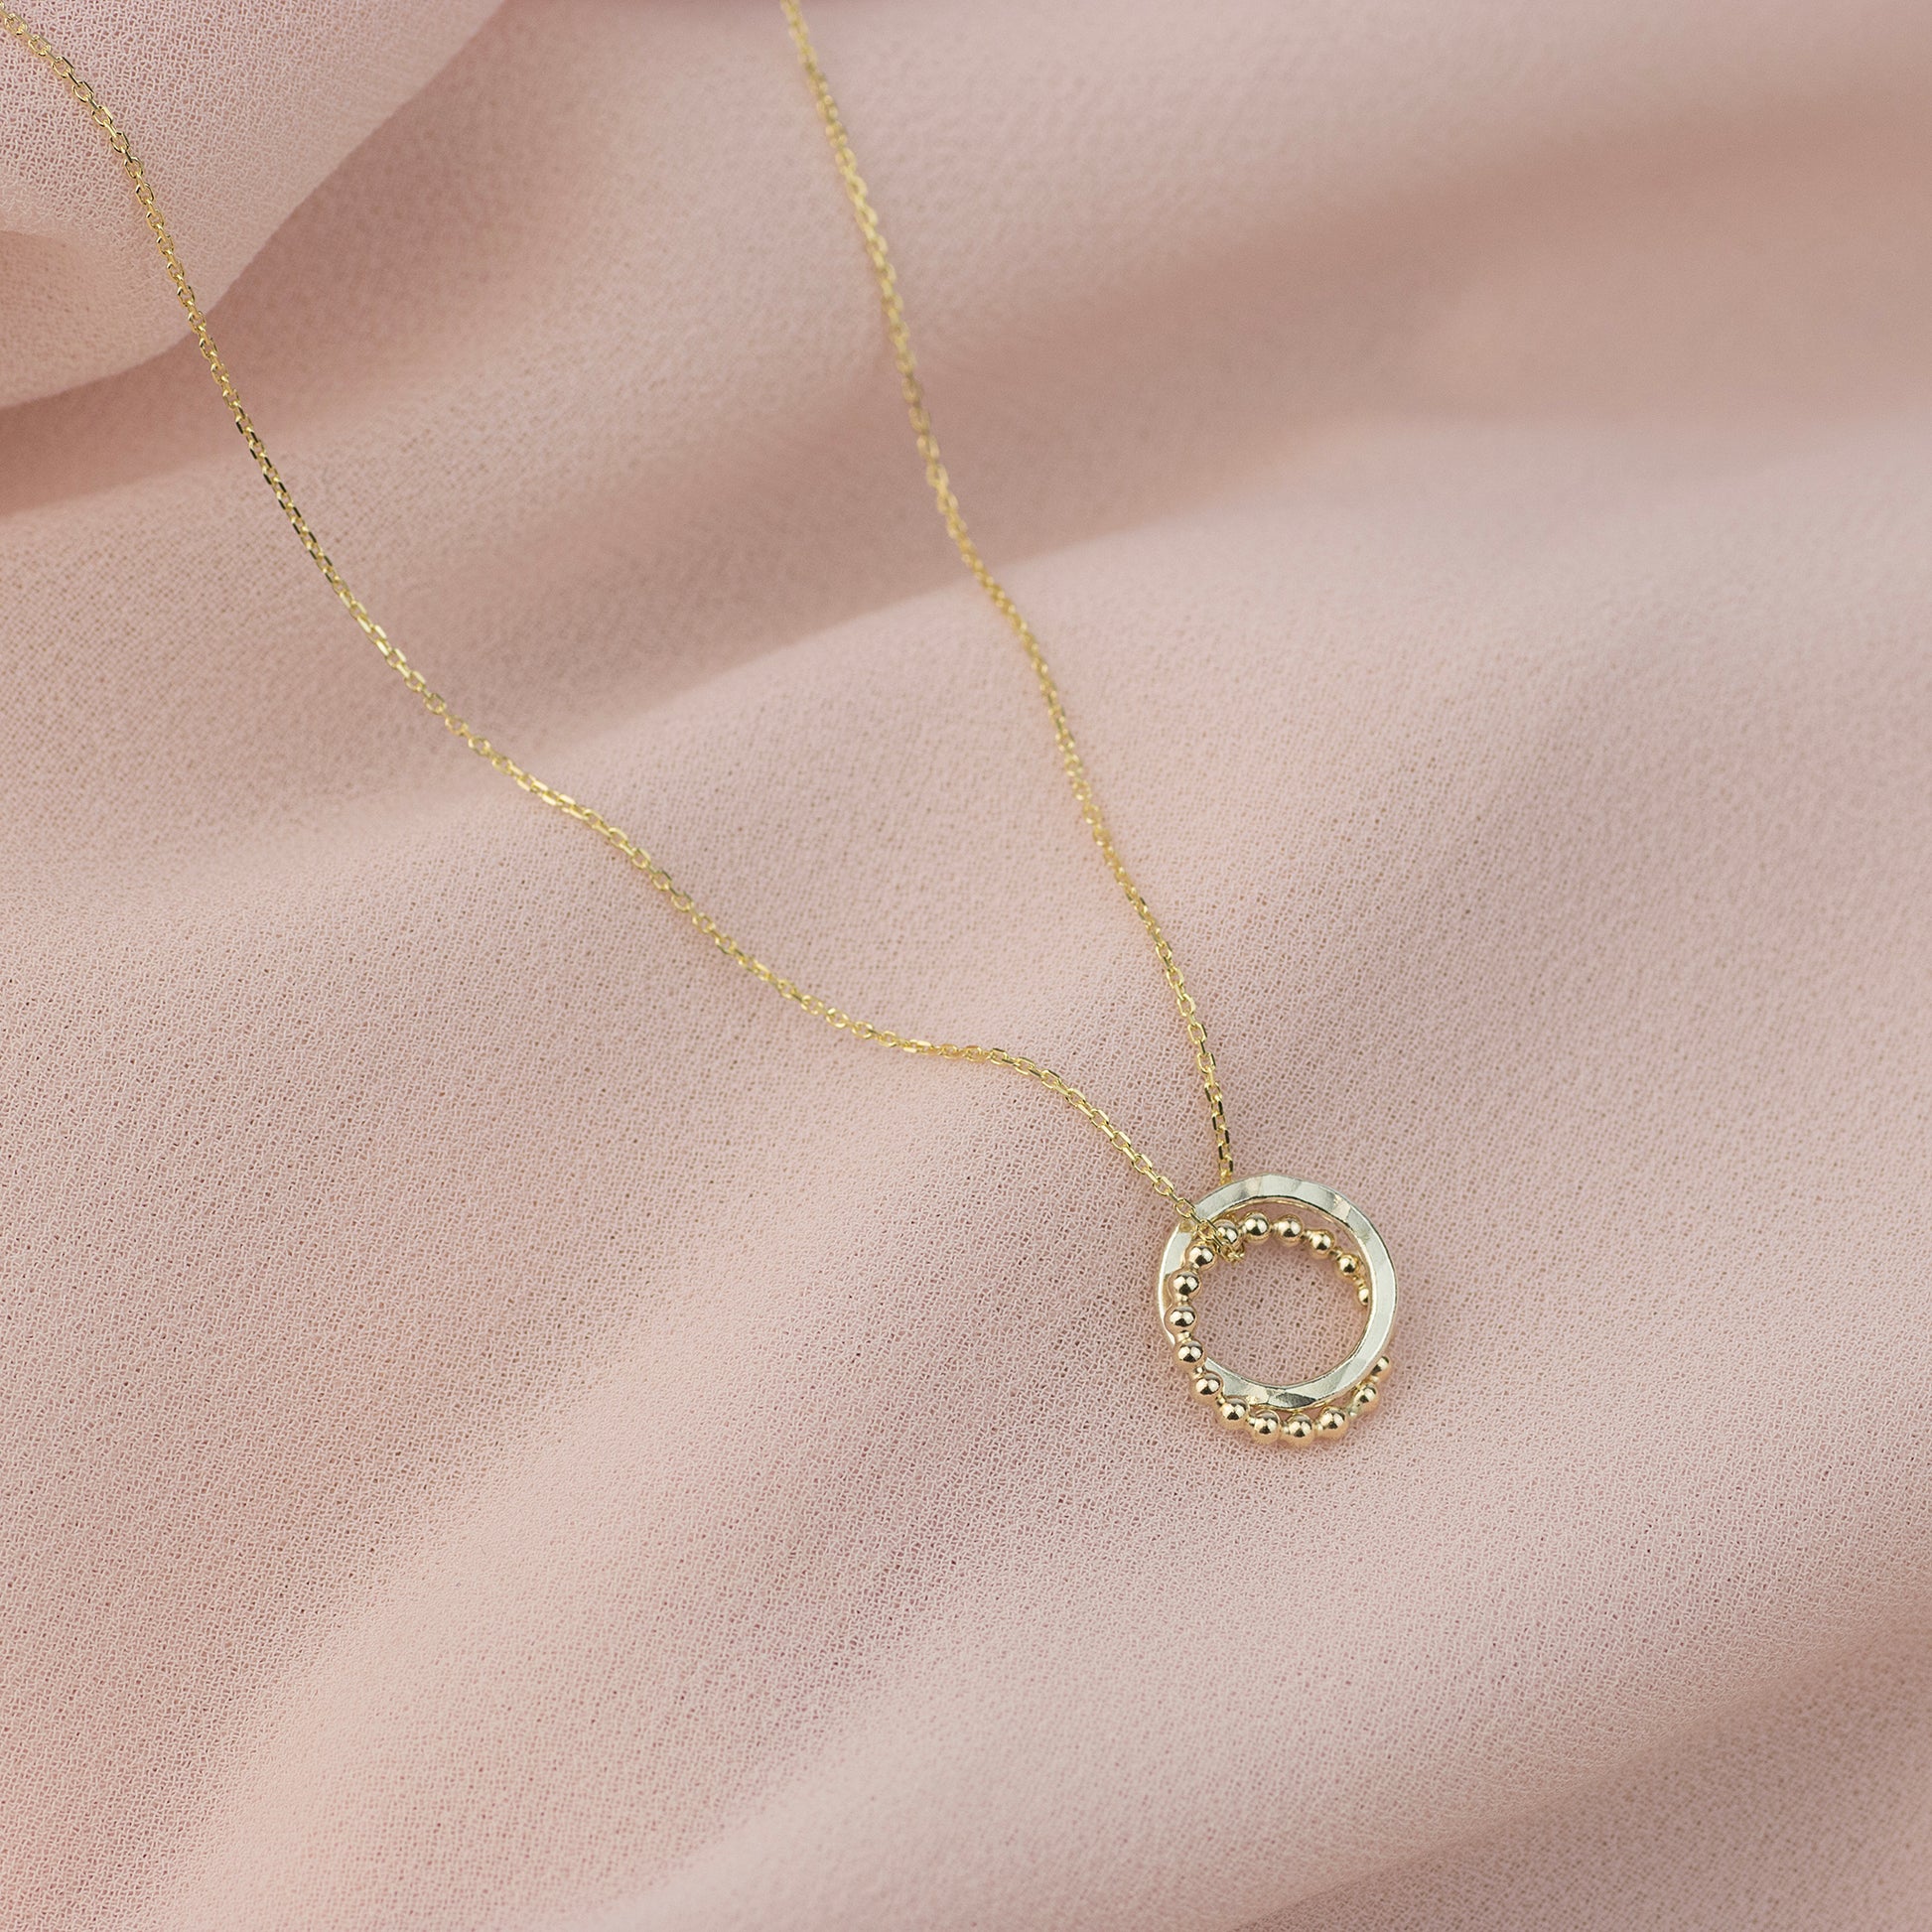 Gift for Sister - 9kt Gold & Silver Sisters Love Knot Necklace